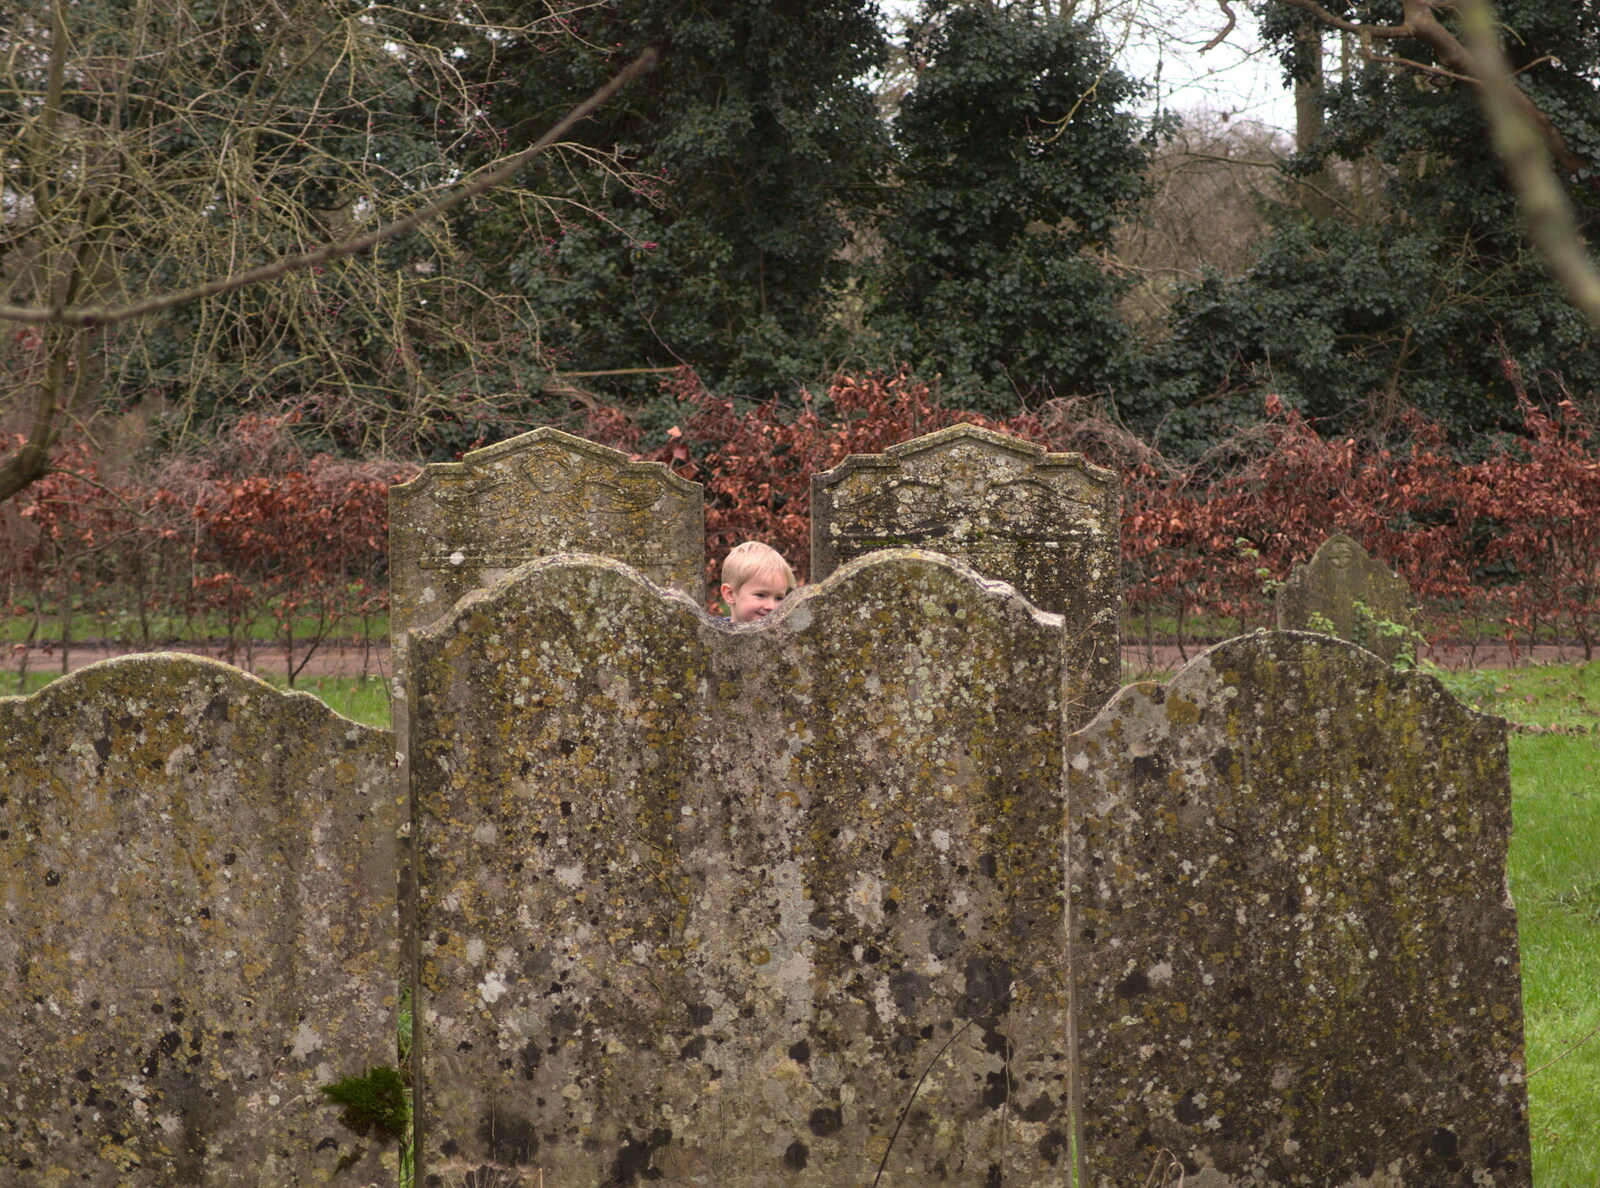 Harry peeks up from behind the gravestones from New Year's Eve With The BBs, The Barrel, Banham, Norfolk - 31st December 2015